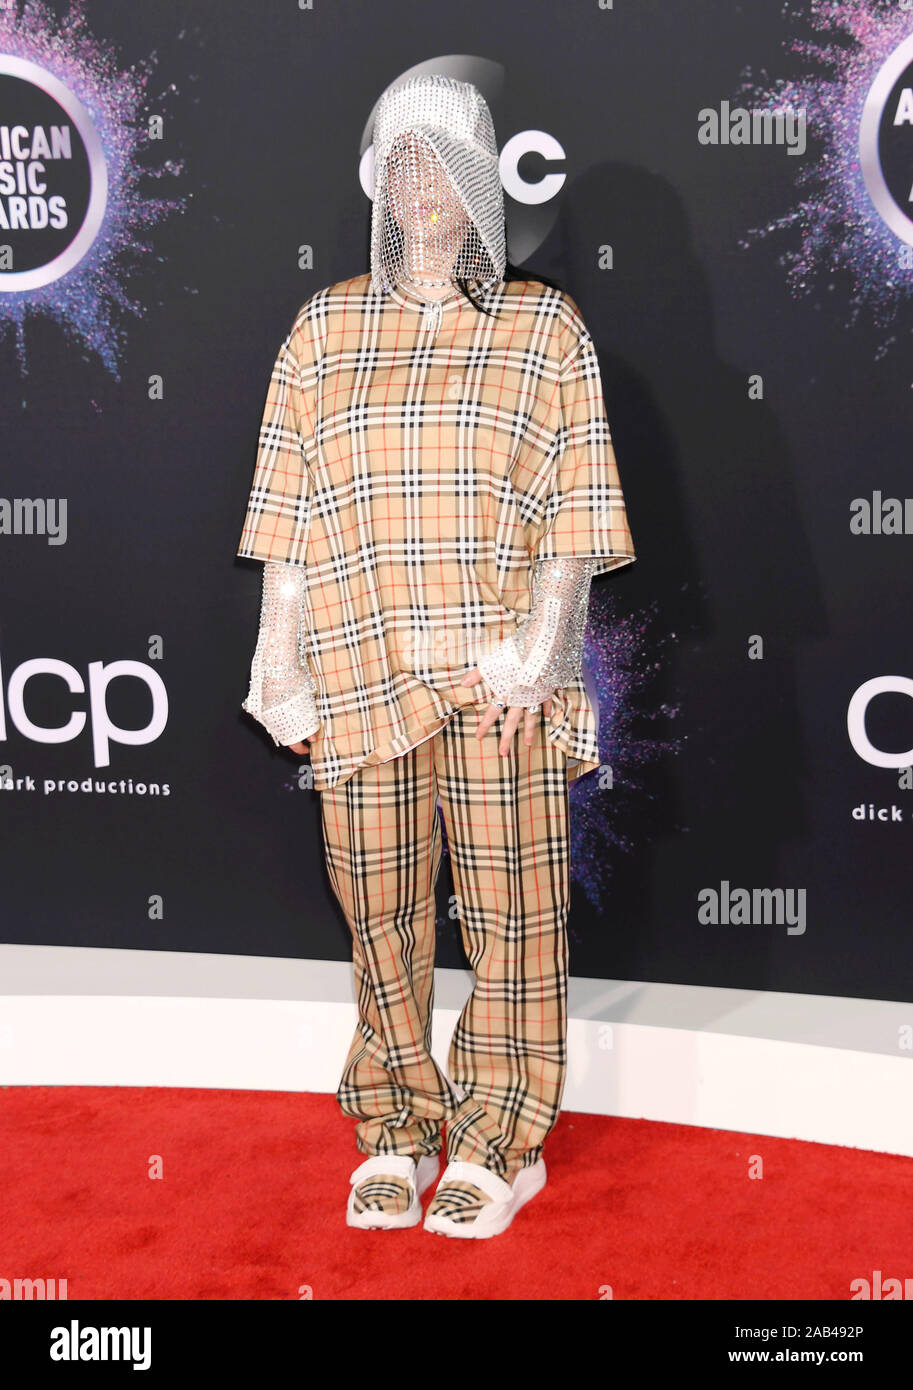 LOS ANGELES, CA - NOVEMBER 24: Billie Eilish  attends the 2019 American Music Awards at Microsoft Theater on November 24, 2019 in Los Angeles, California. Stock Photo